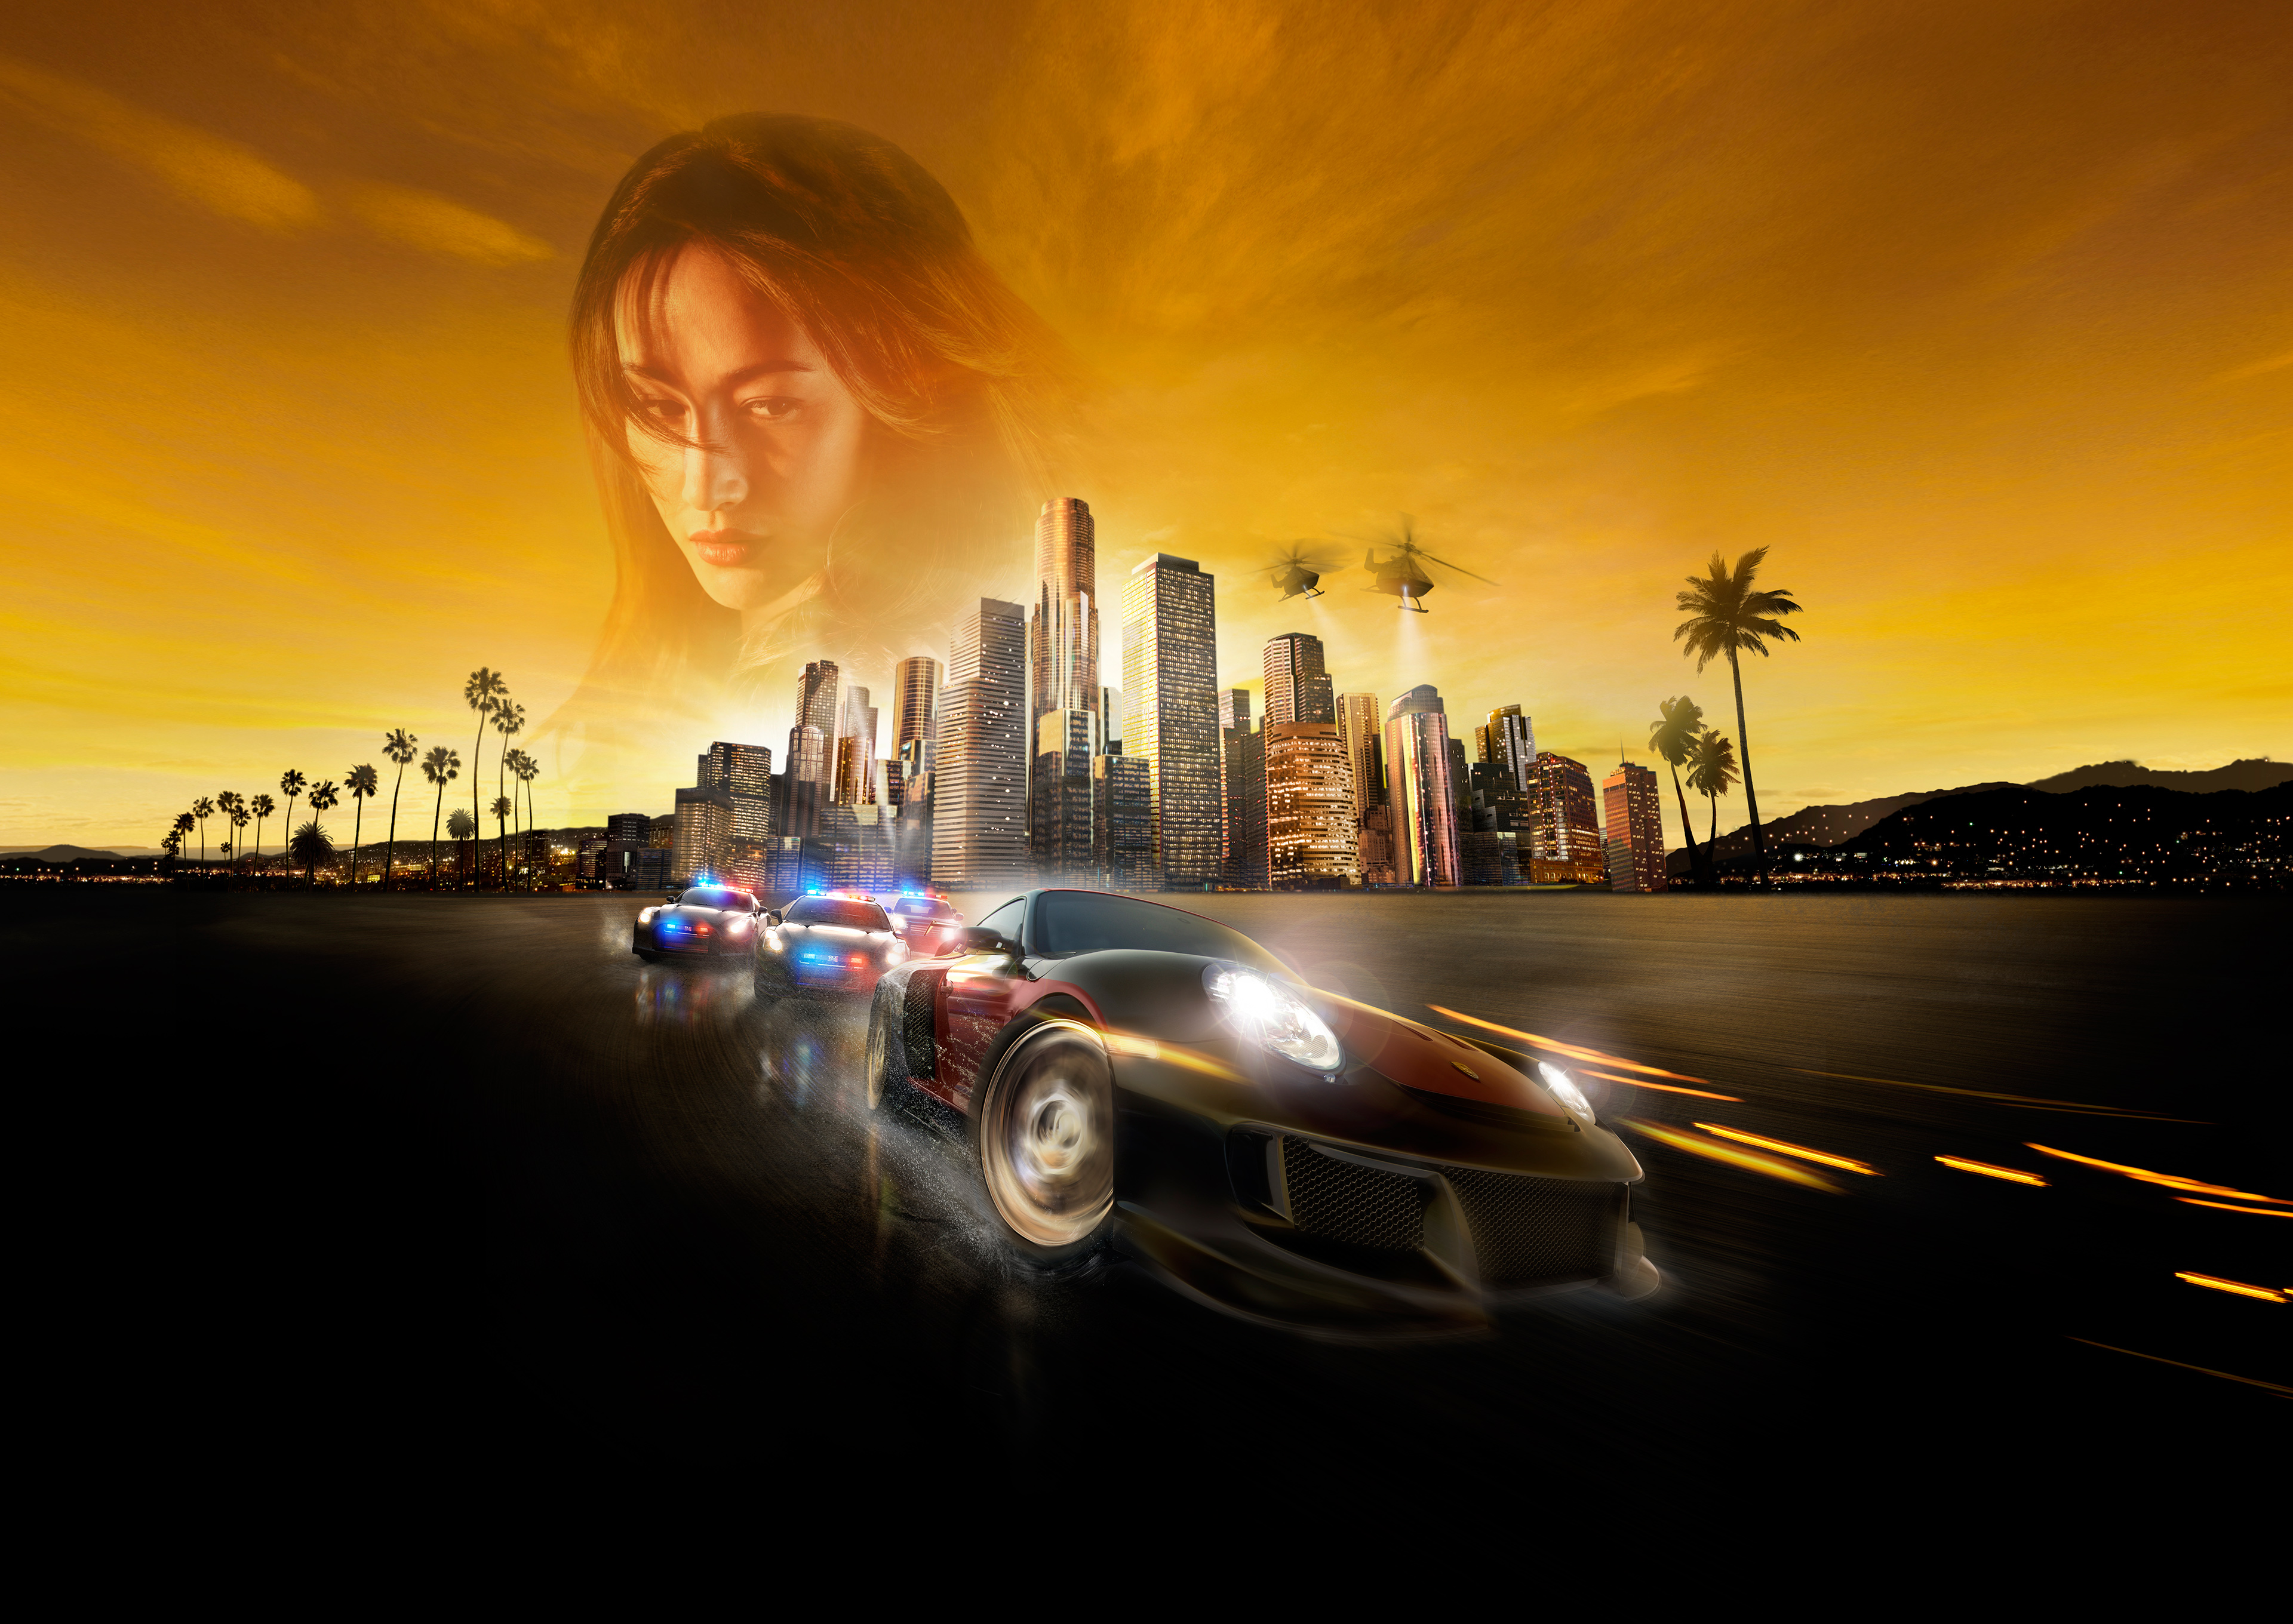 need for speed underground patch 1.2.51733